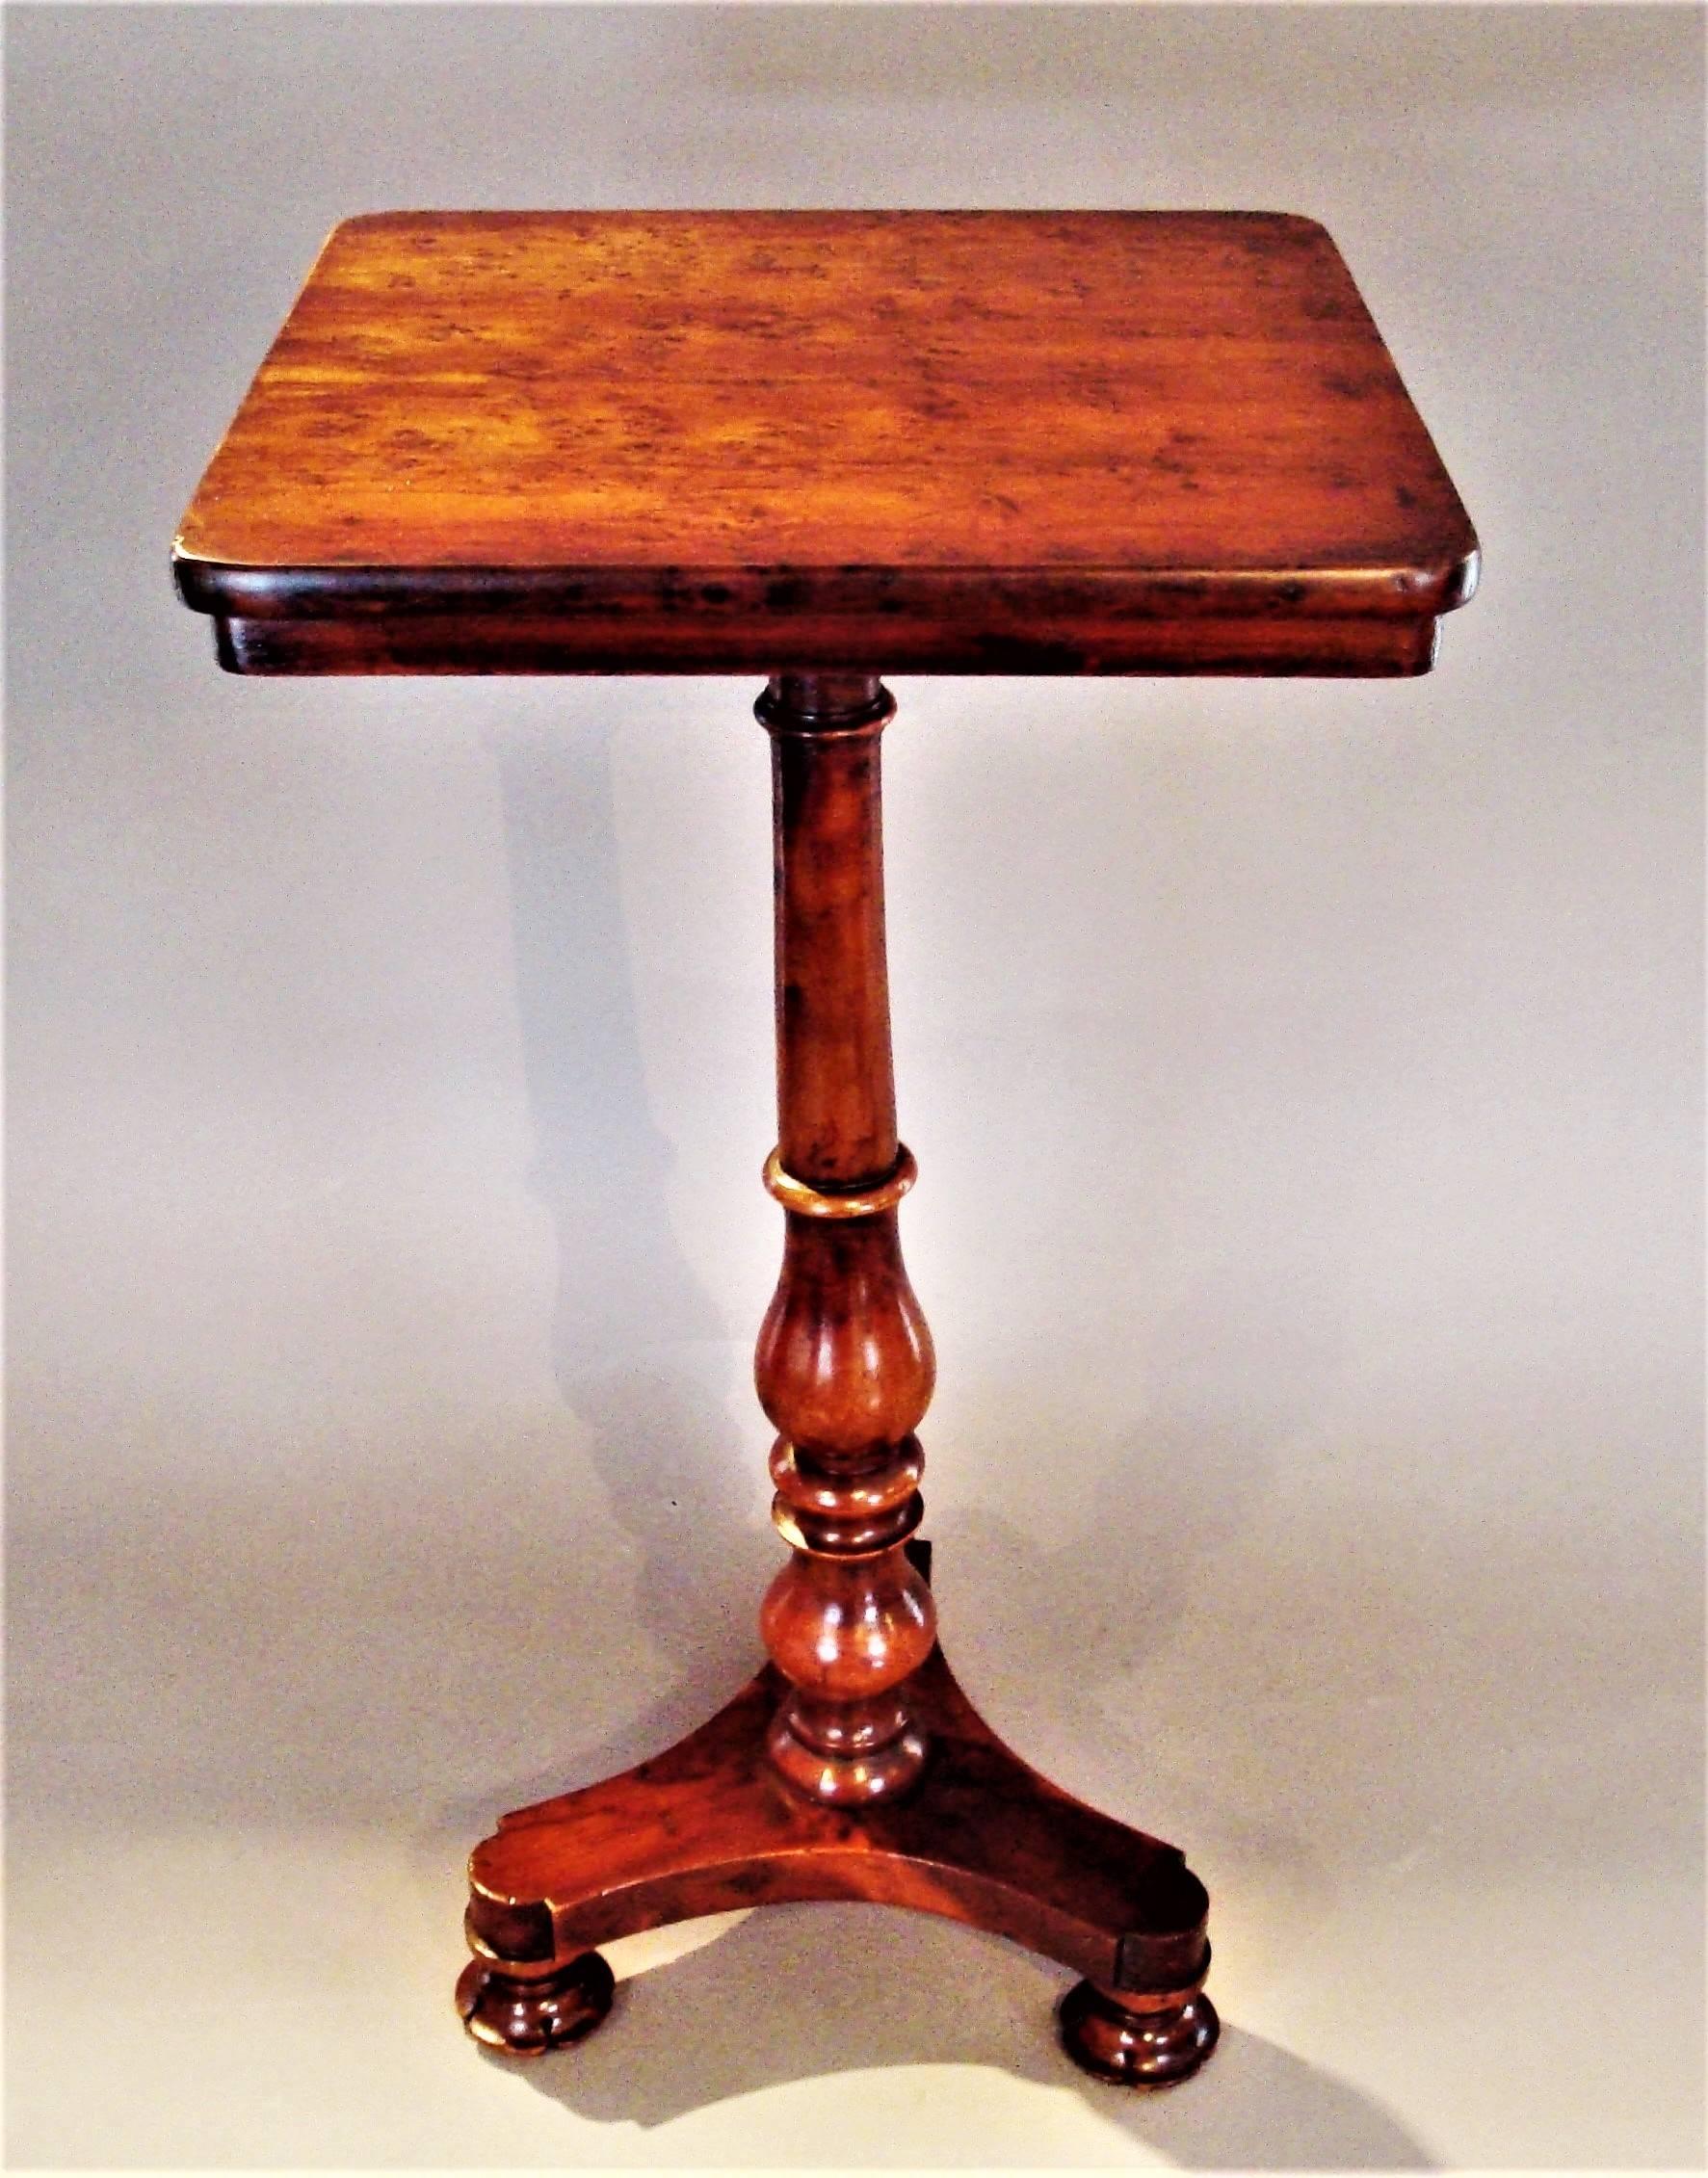 Unusual Regency yew wood wine or occasional table; with a tilting top and of small proportions; the burr yew square top with rounded corners and an inset shallow frieze below raised on a turned vase tapering column on a shapely tri-form base